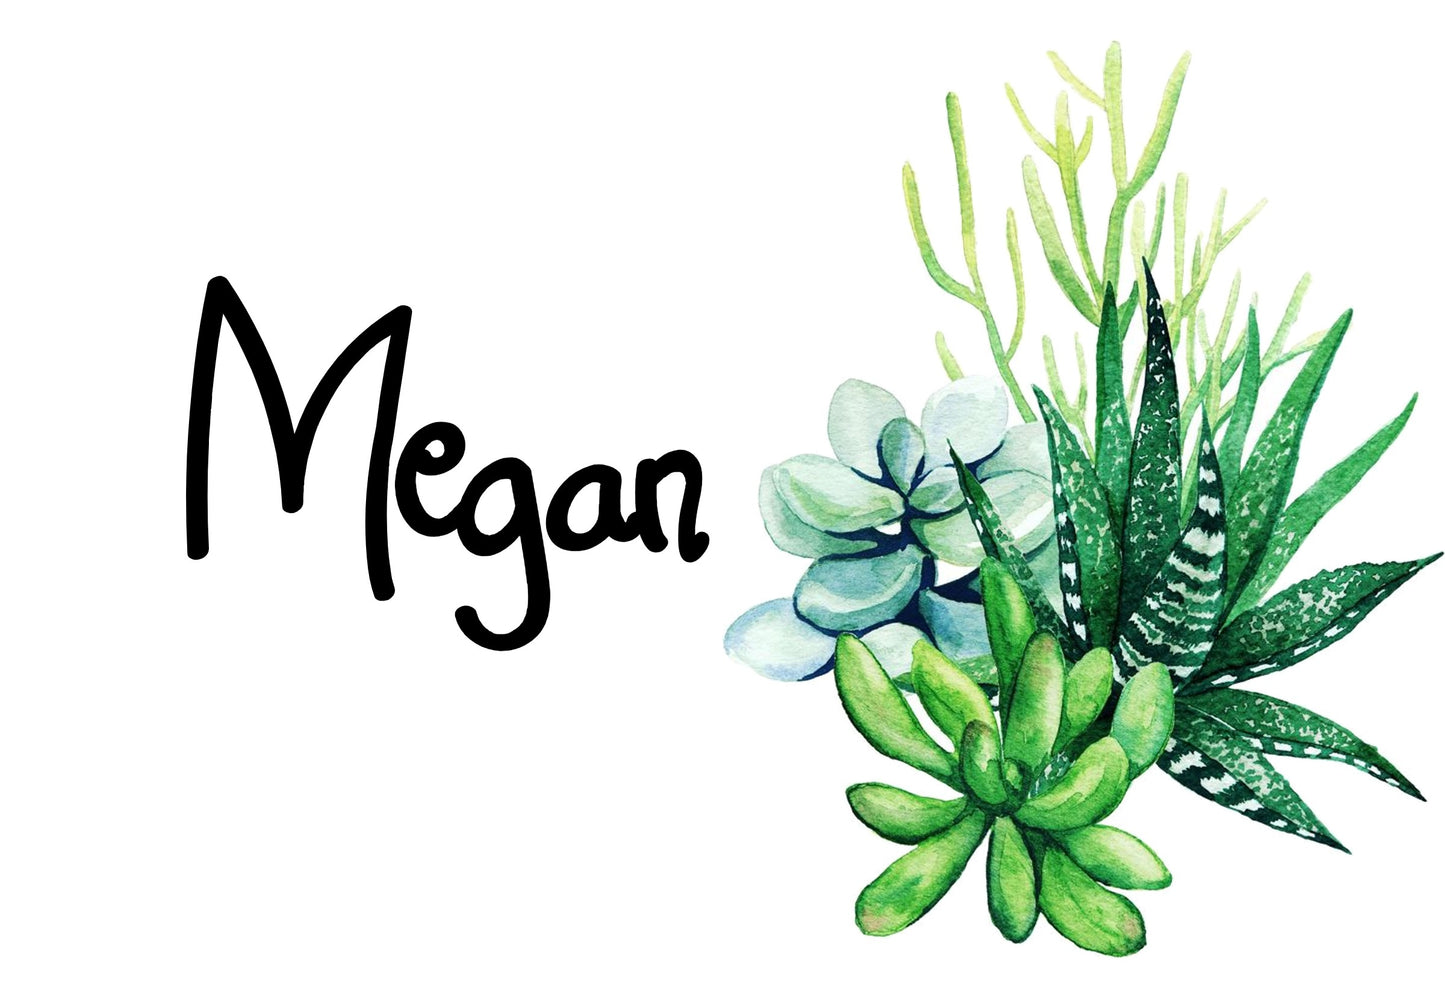 05/13/24 Succulent Watercolor Painting Workshop with Owlfeathers Watercolors 6pm